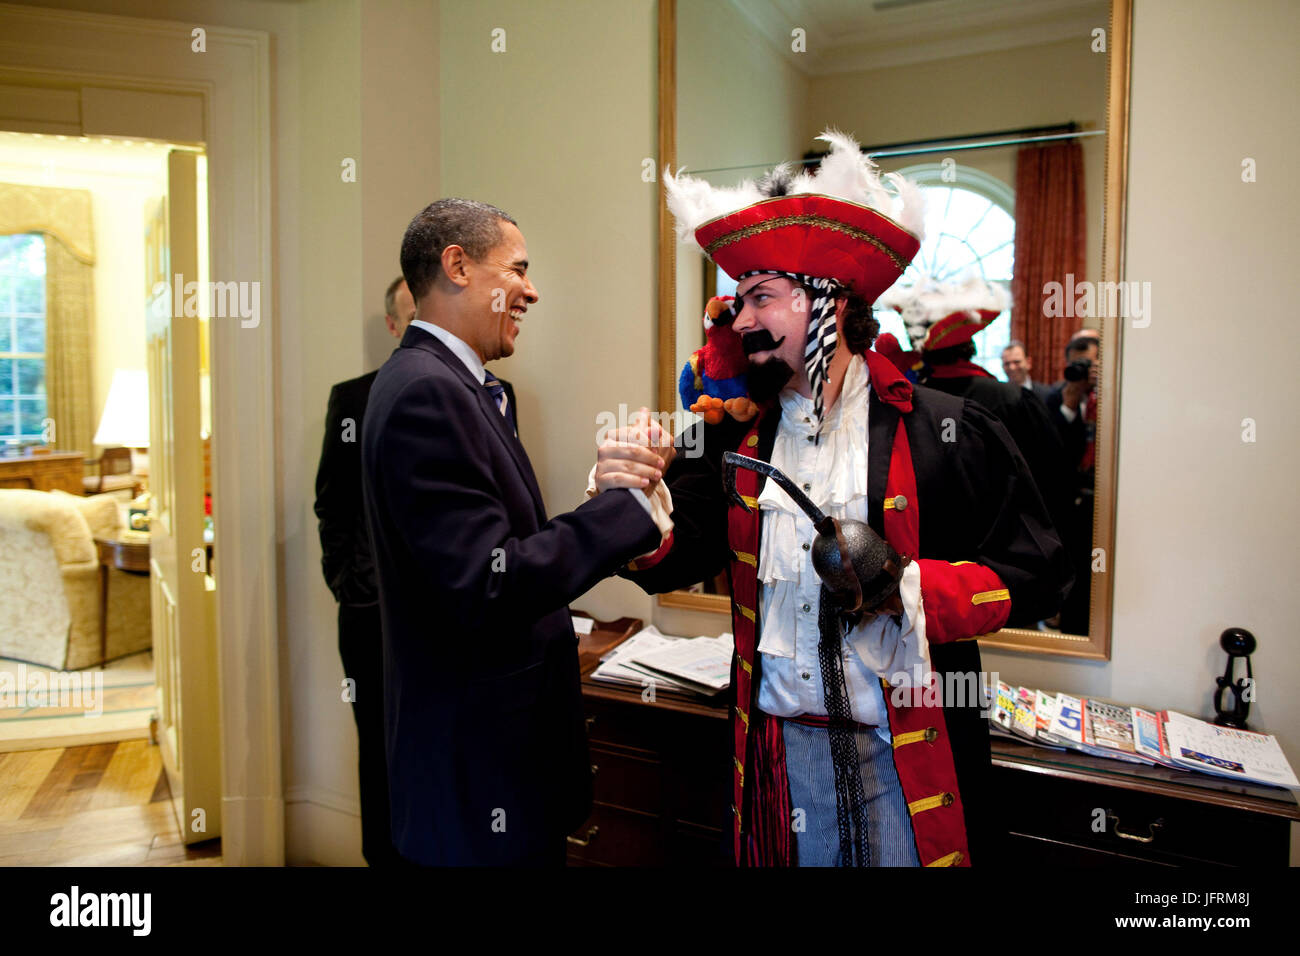 President Barack Obama reacts to seeing speechwriter Cody Keenan dressed up as Captain Hook.  Keenan dressed as a pirate for an Oval Office photo shot for use in the PresidentÕs speech to the White House Correspondents Association dinner May 9, 2009.  Official White House Photo by Pete Souza.  This official White House photograph is being made available for publication by news organizations and/or for personal use printing by the subject(s) of the photograph. The photograph may not be manipulated in any way or used in materials, advertisements, products, or promotions that in any way suggest a Stock Photo